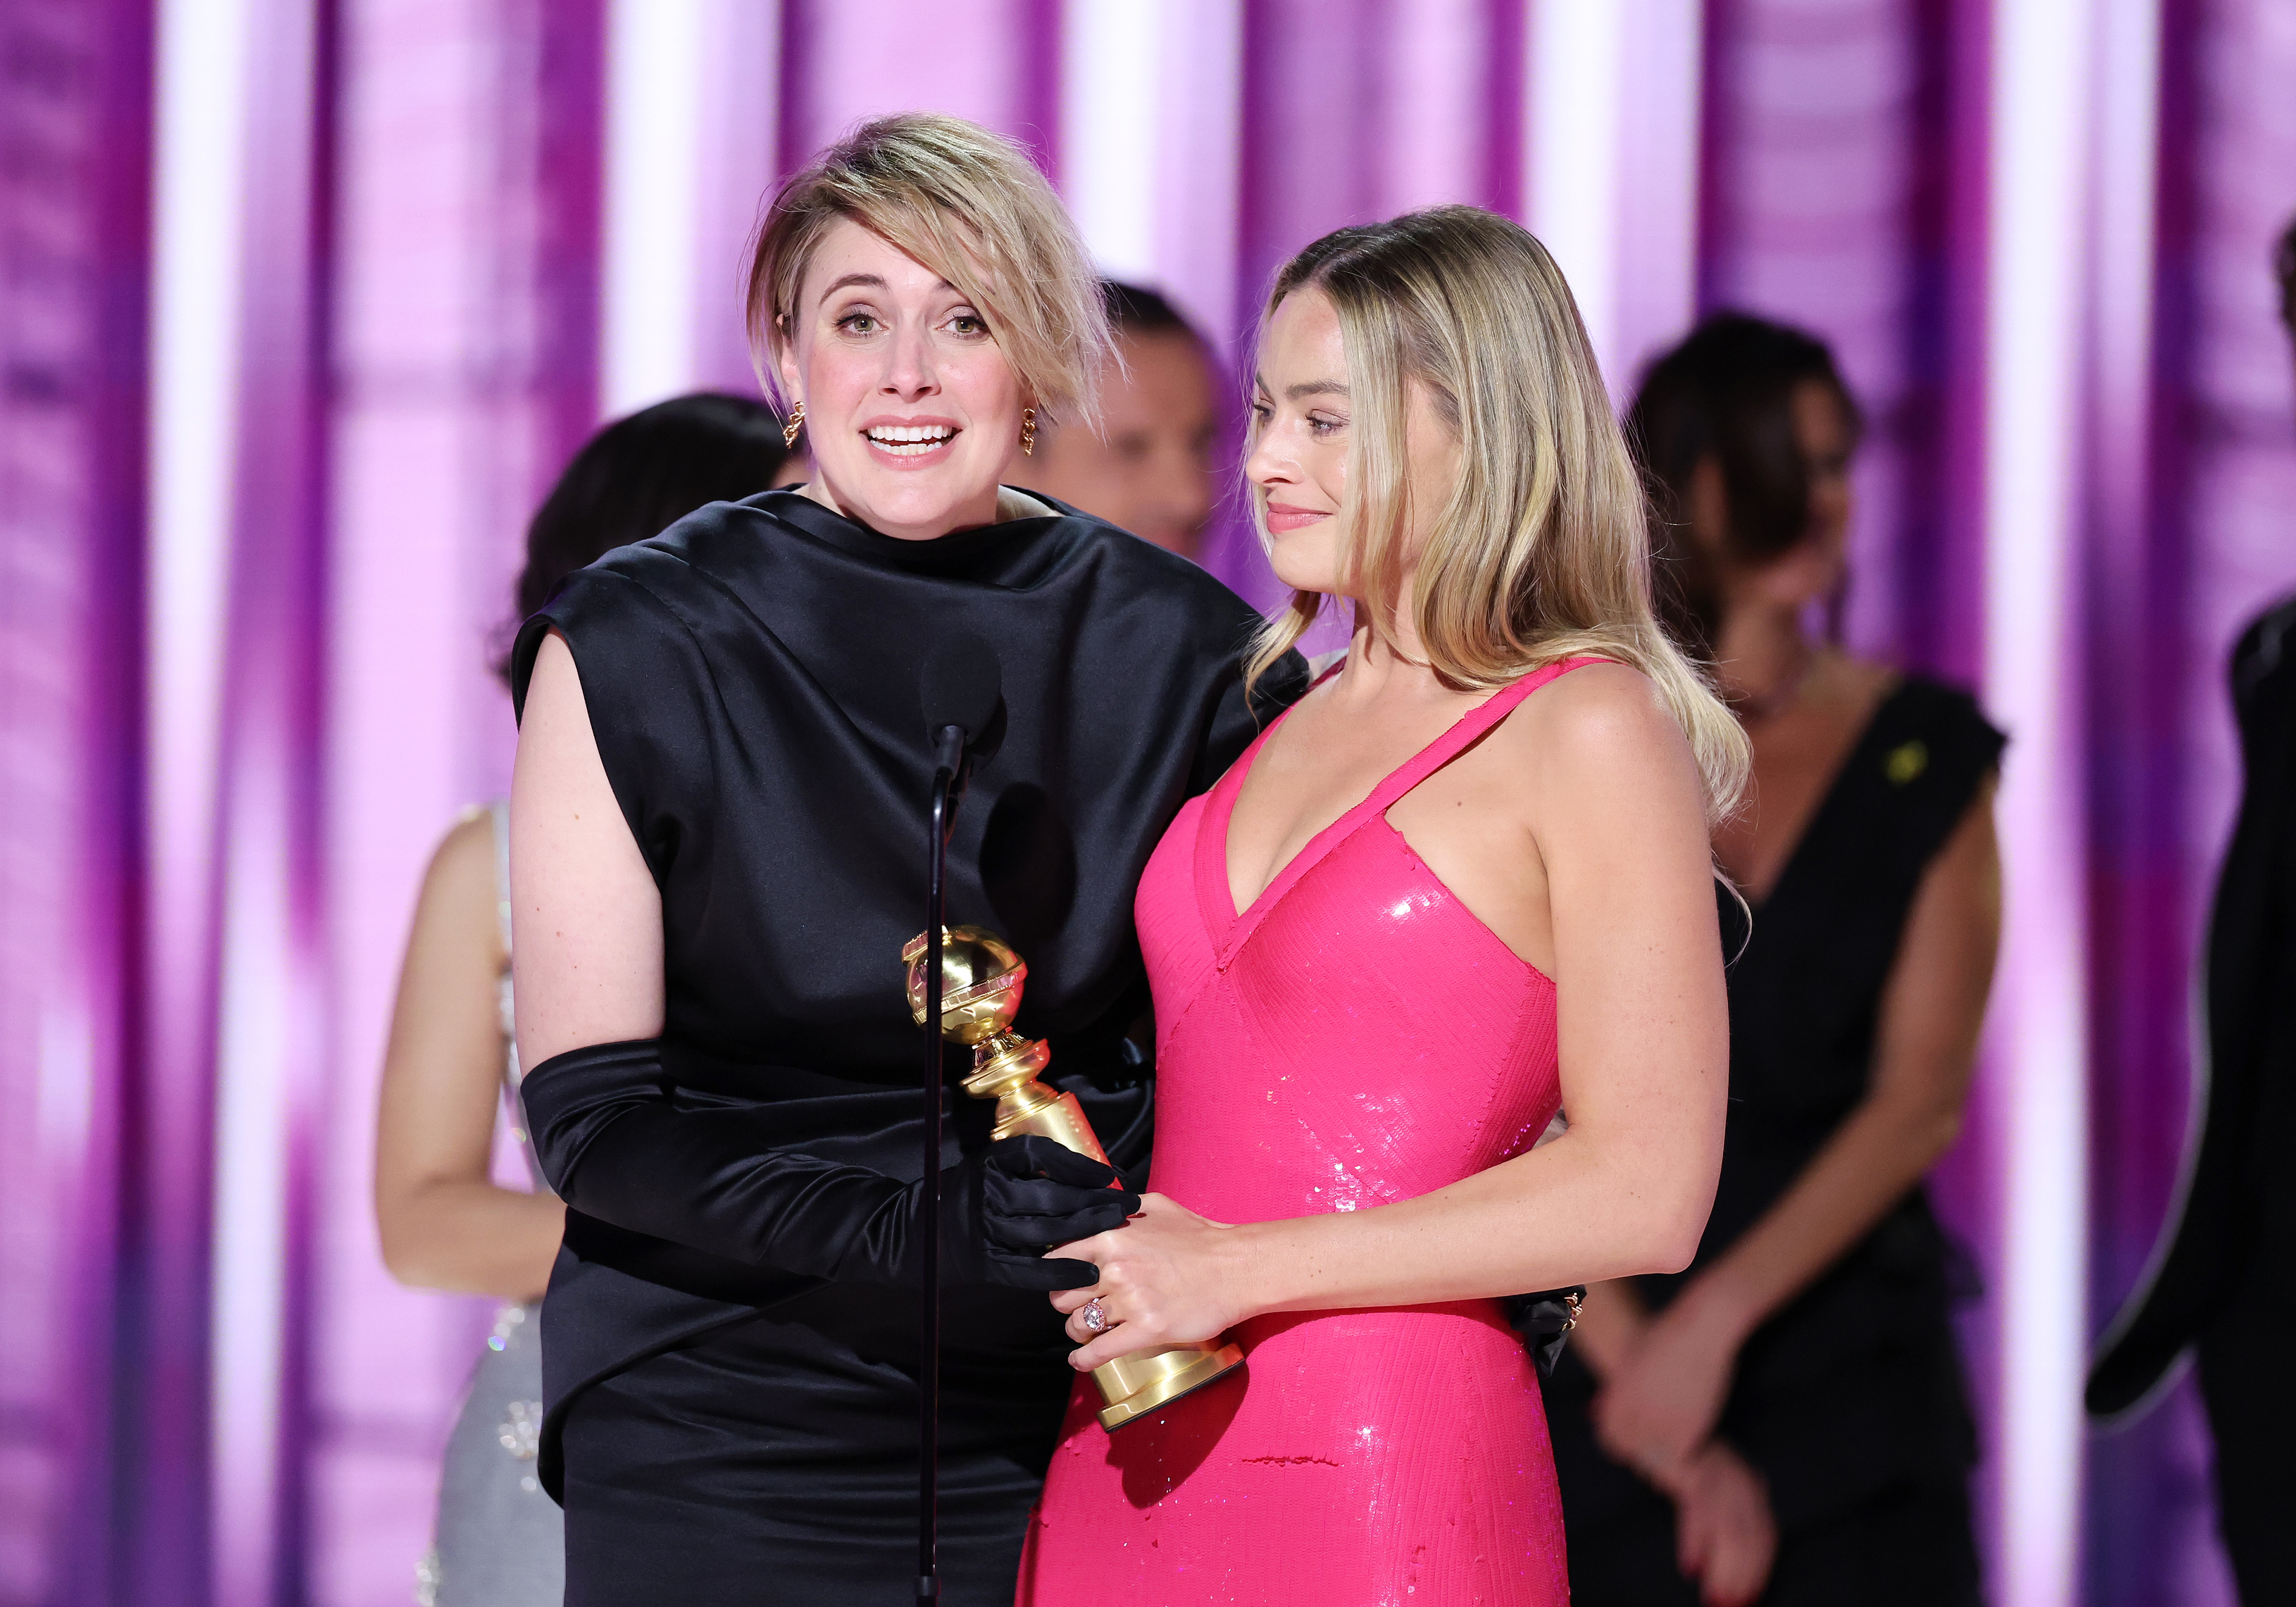 Greta and Margot holding an award onstage